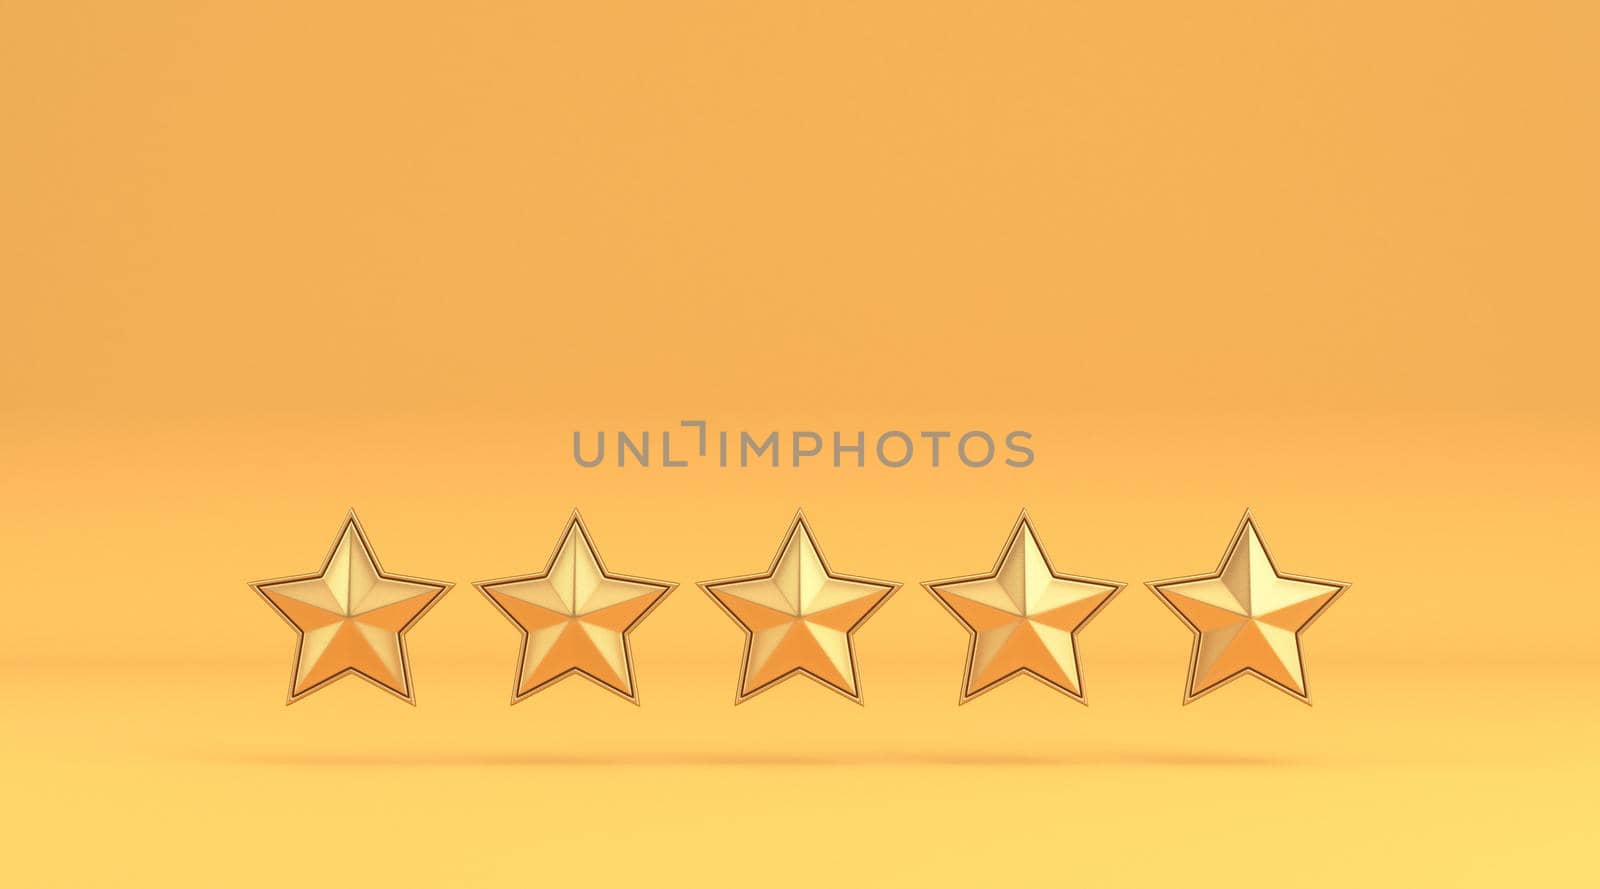 Five star top quality sign 3D rendering illustration isolated on yellow background